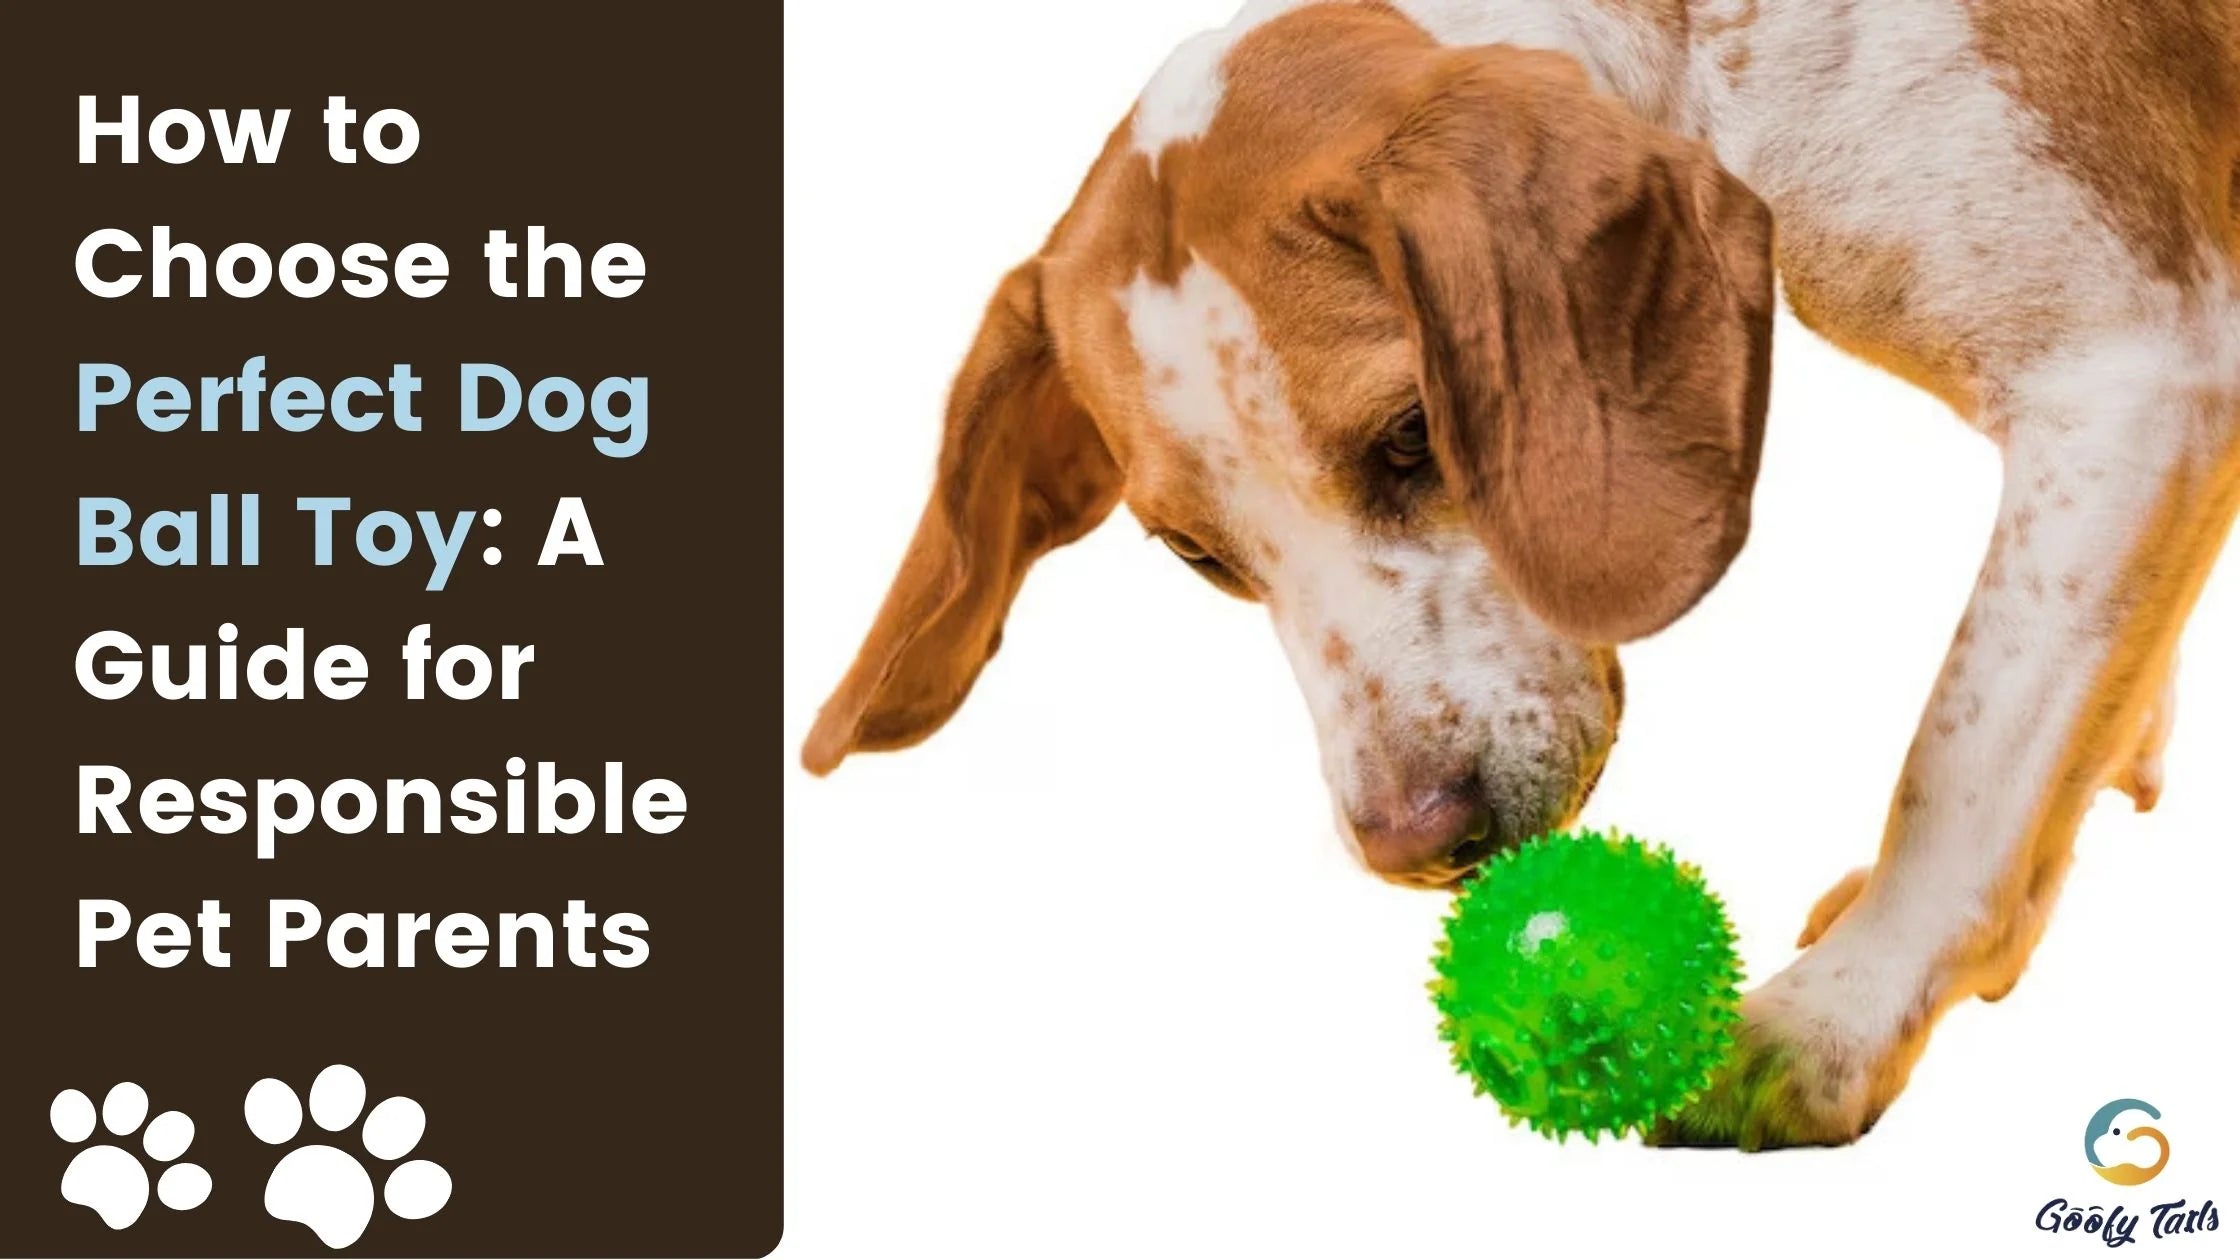 How to Choose the Perfect Dog Ball Toy: A Guide for Responsible Pet Parents